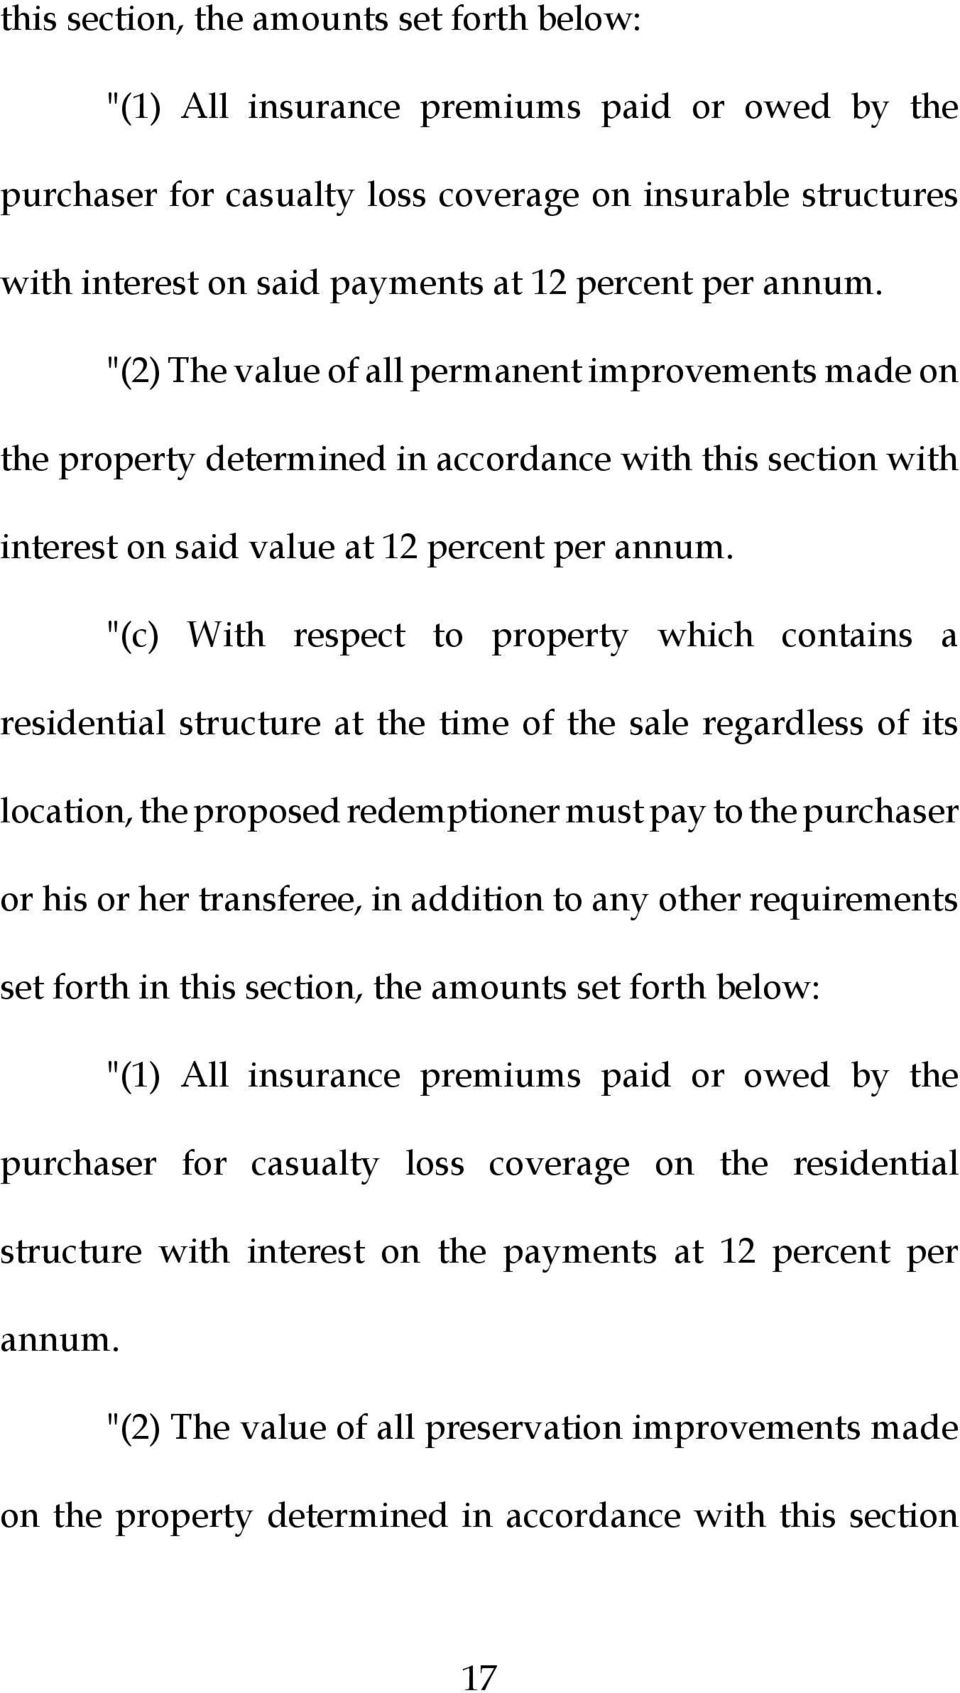 "(c) With respect to property which contains a residential structure at the time of the sale regardless of its location, the proposed redemptioner must pay to the purchaser or his or her transferee,